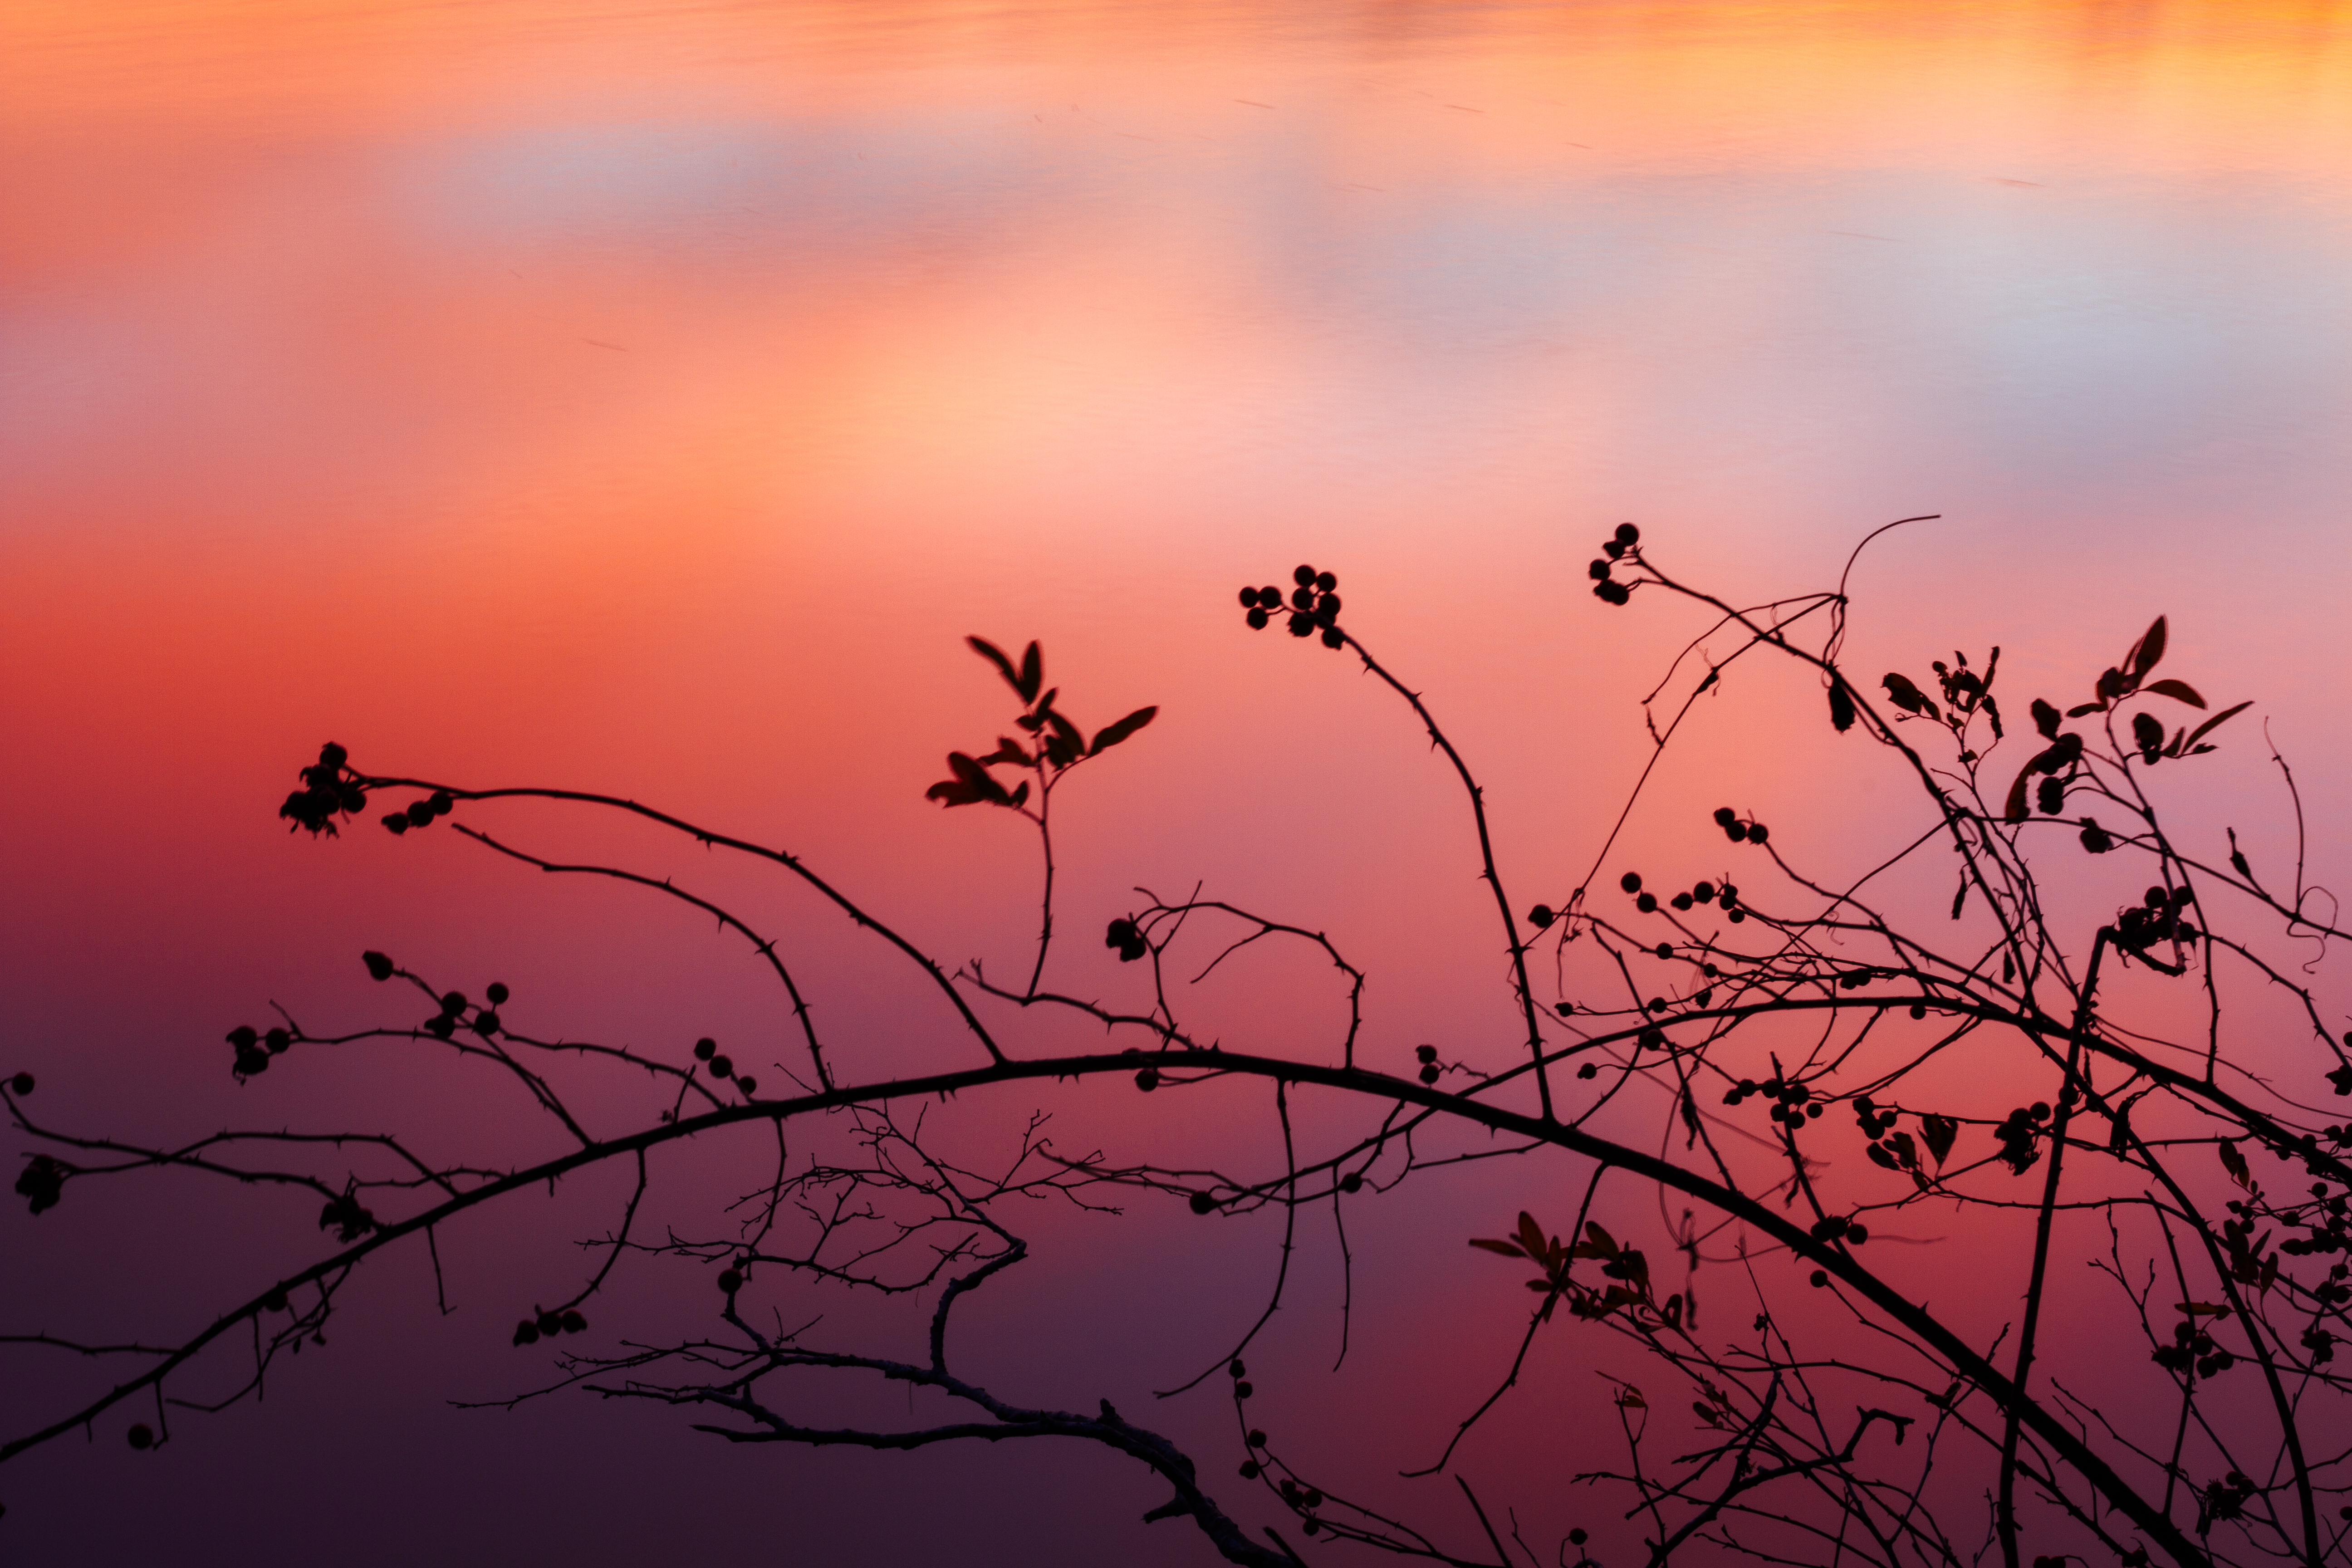 sunset, nature, silhouette, branch, shadows Image for desktop